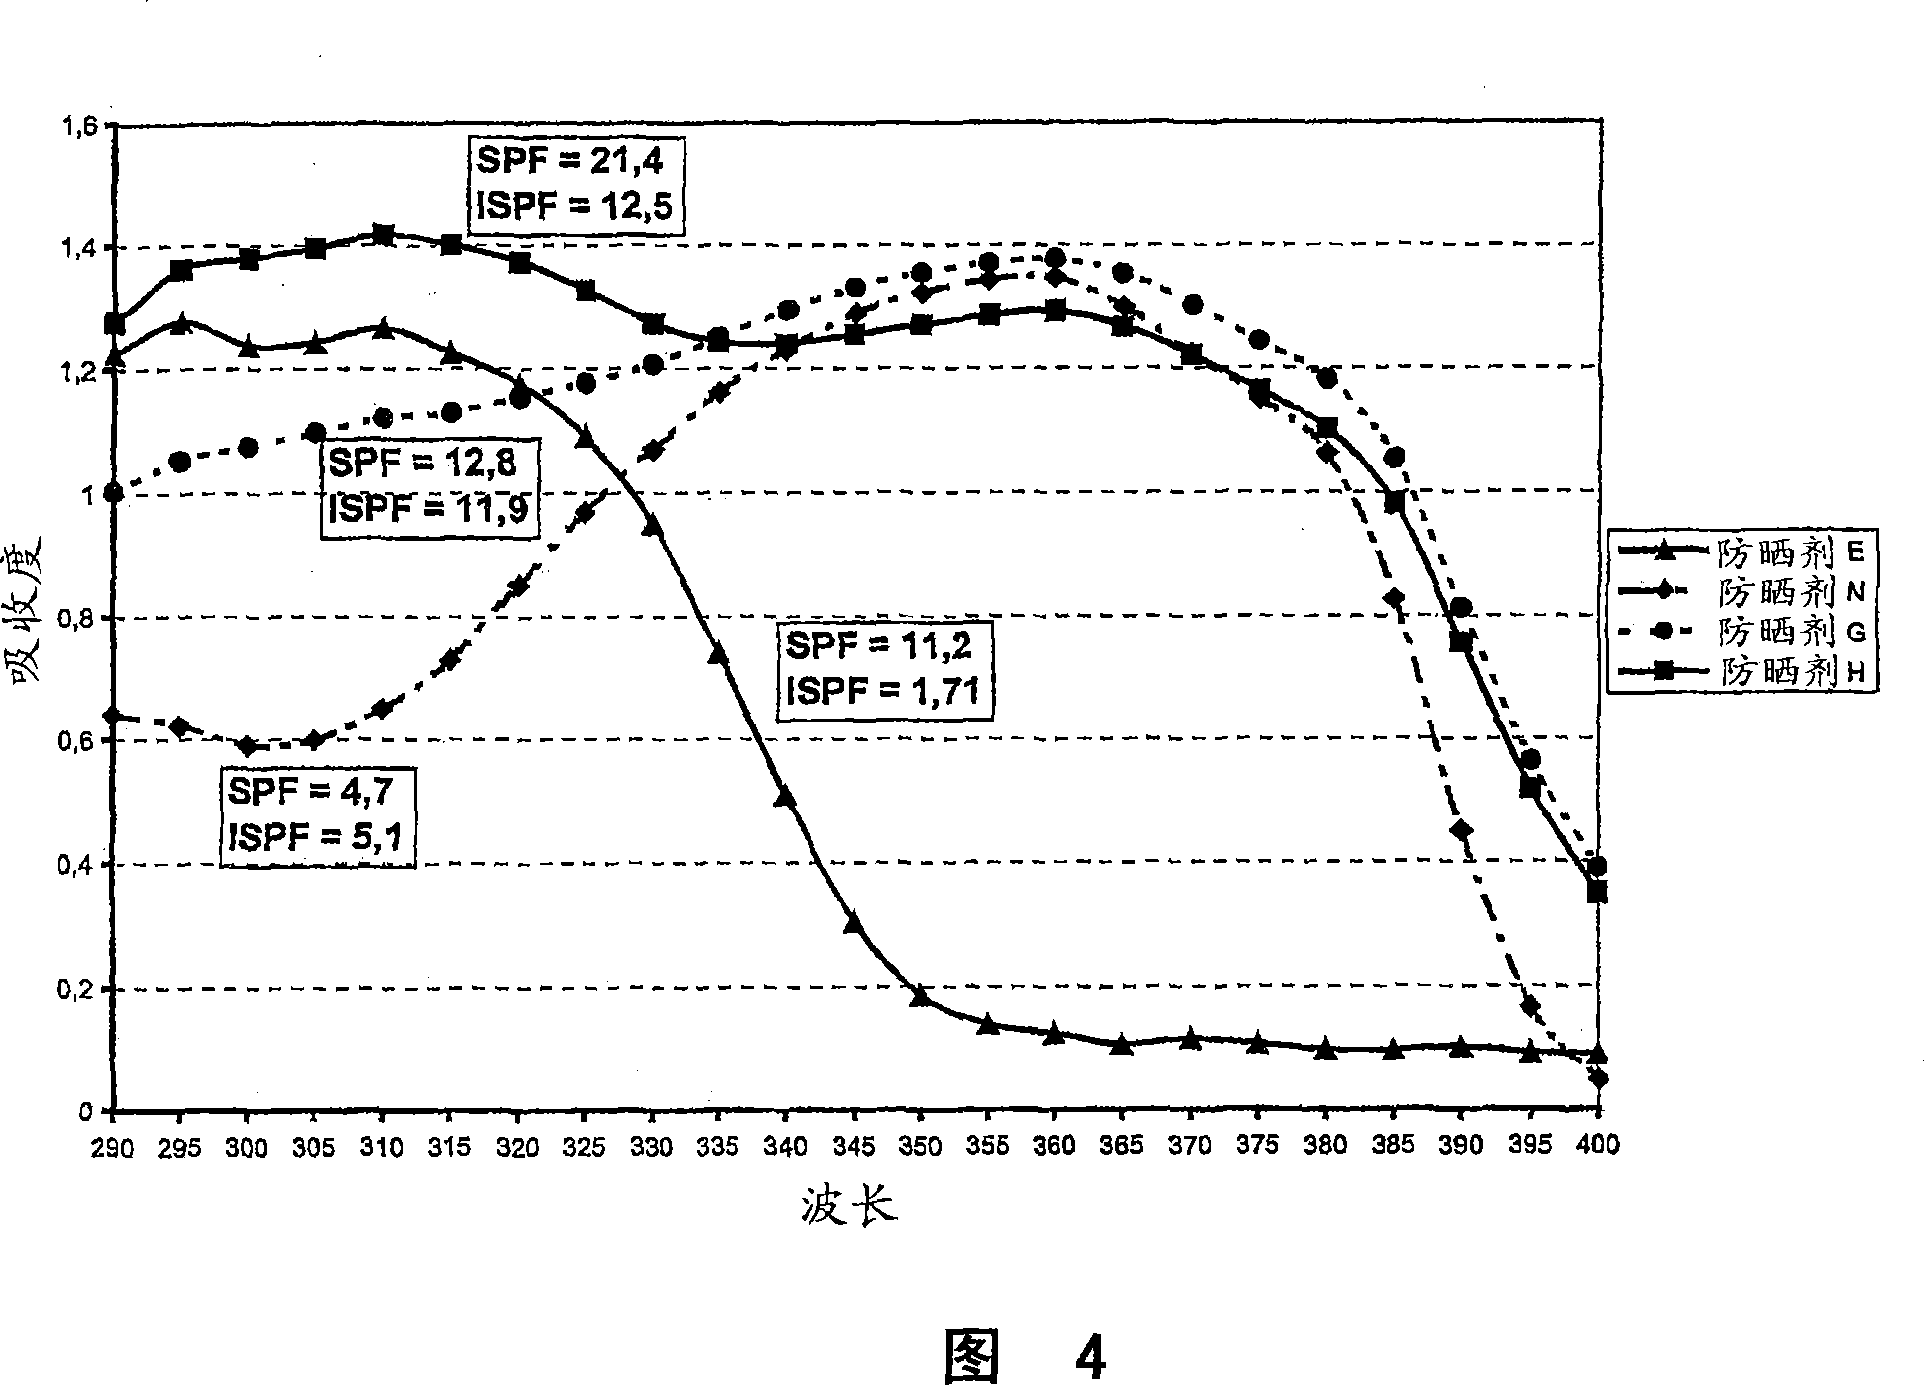 Method for determining an integral sun protection factor encompassing UVA and UVB radiation